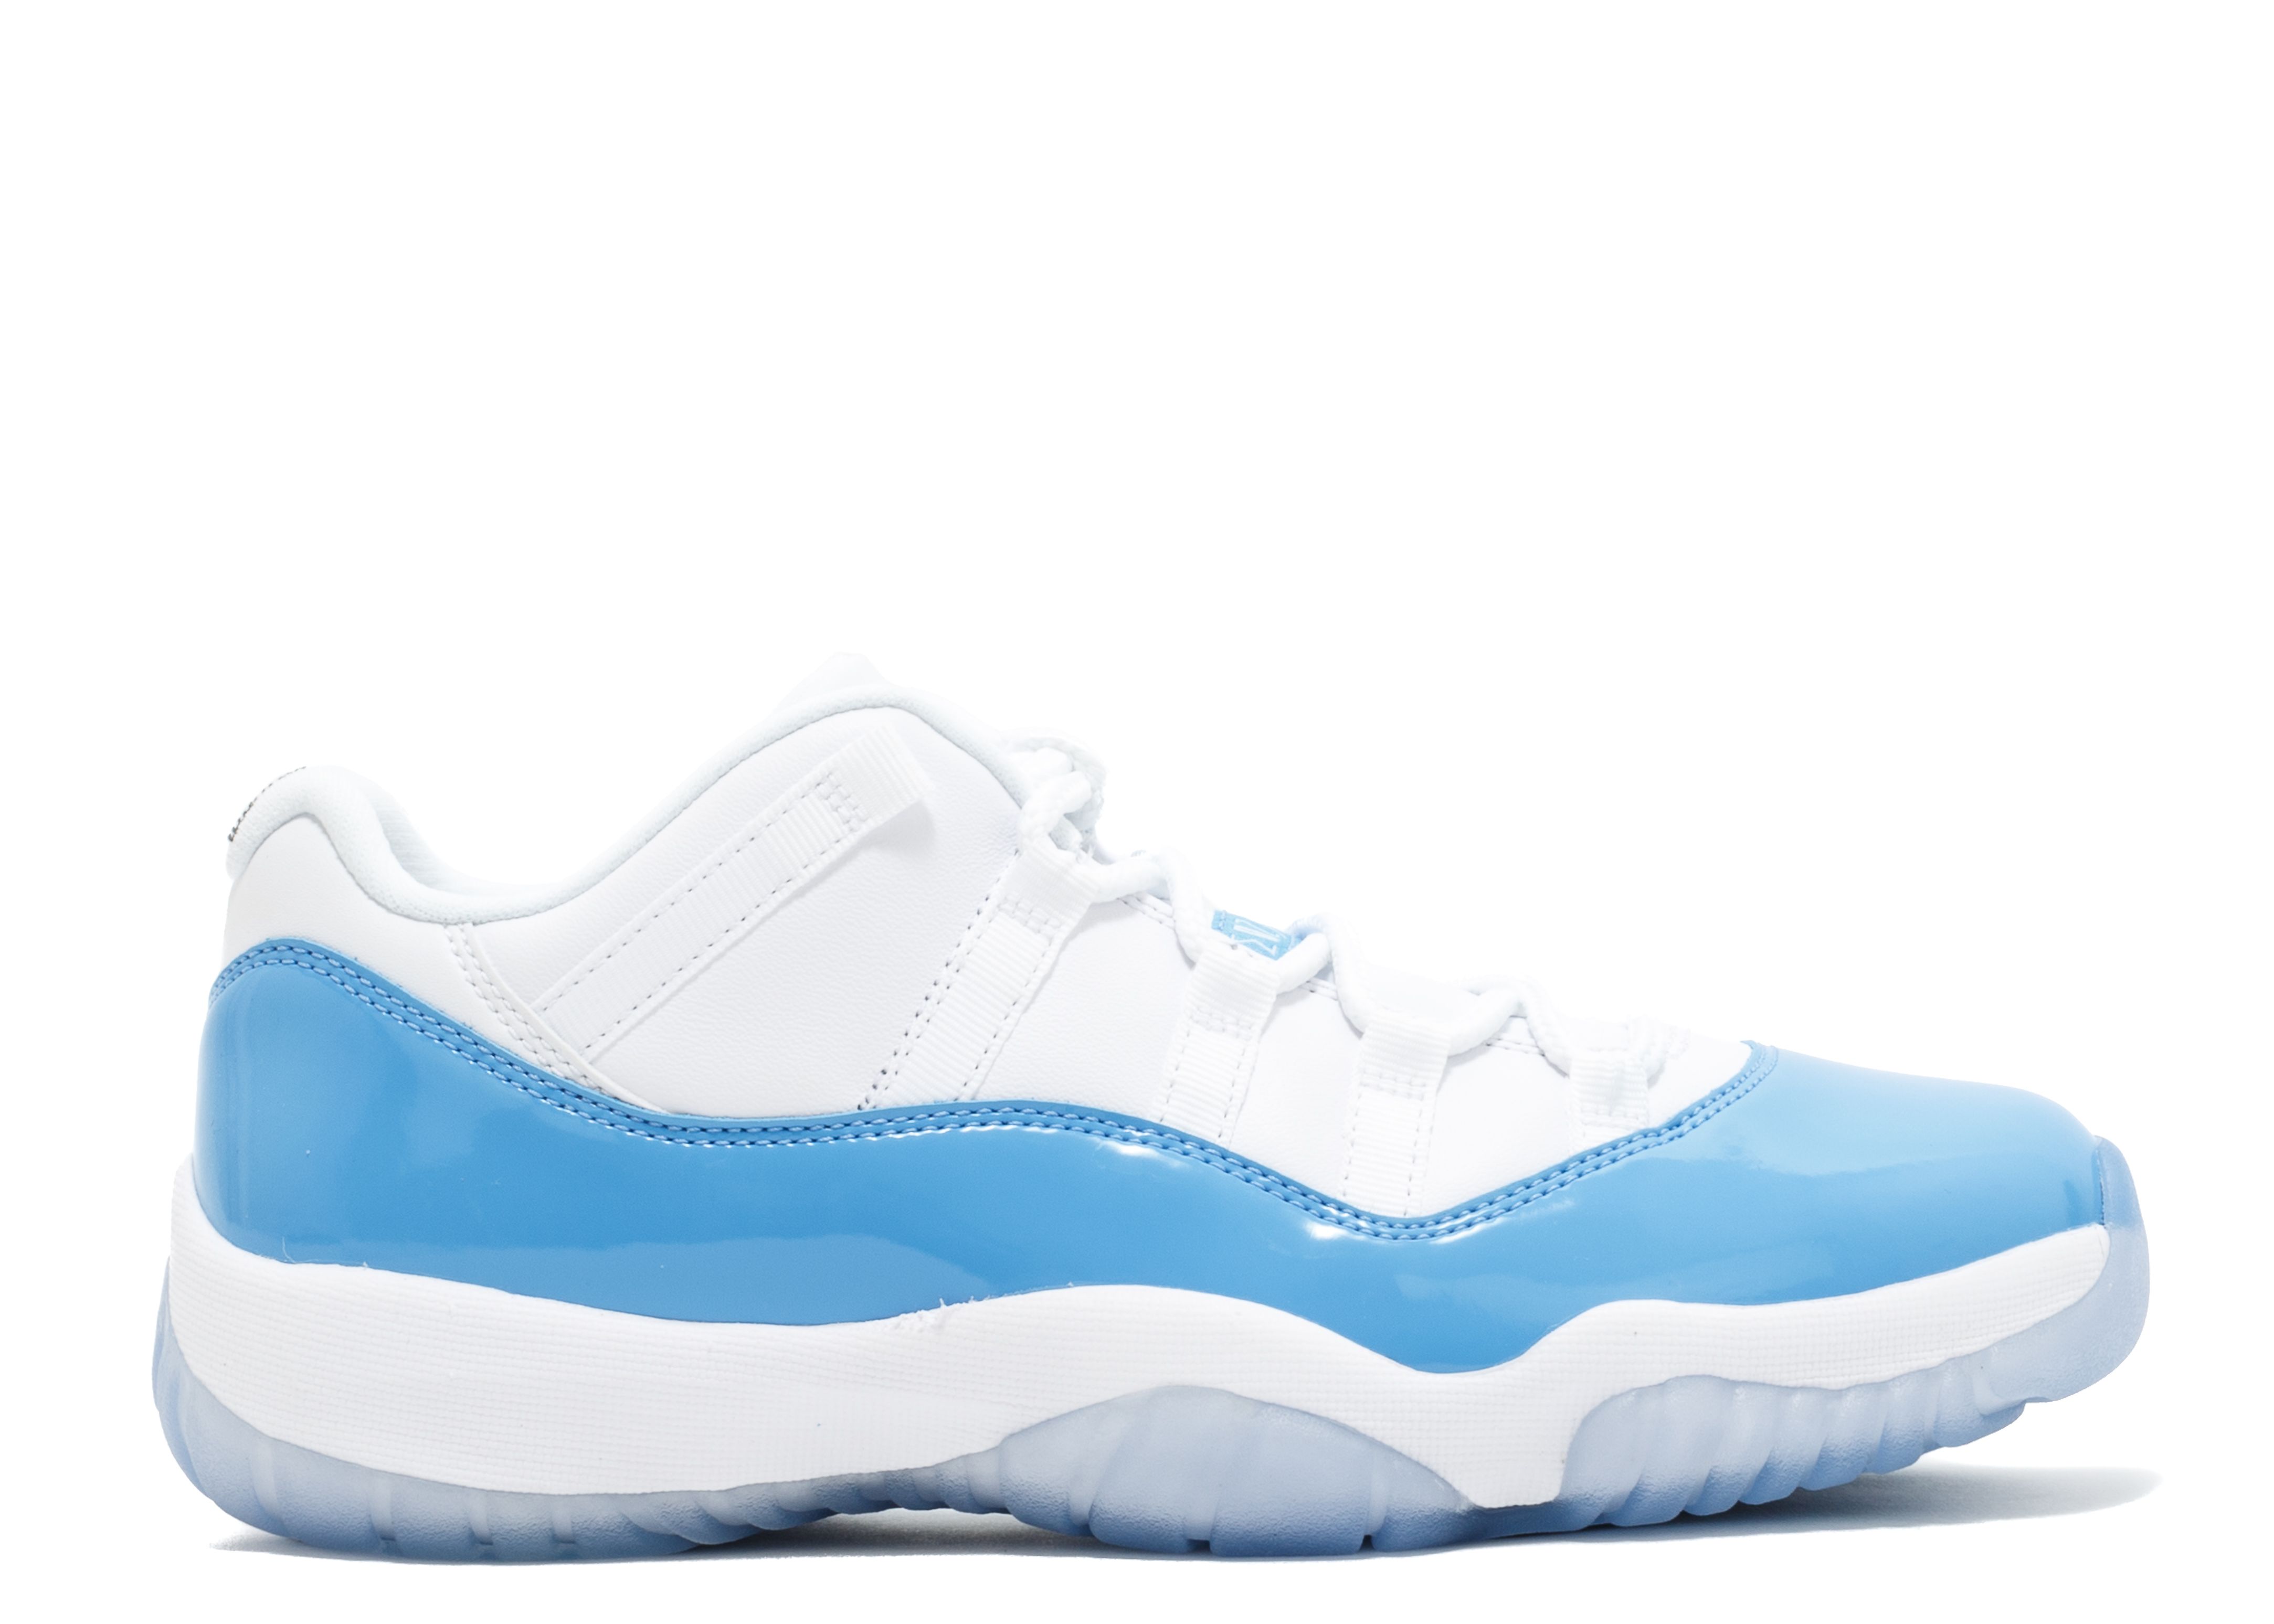 white and baby blue jordans